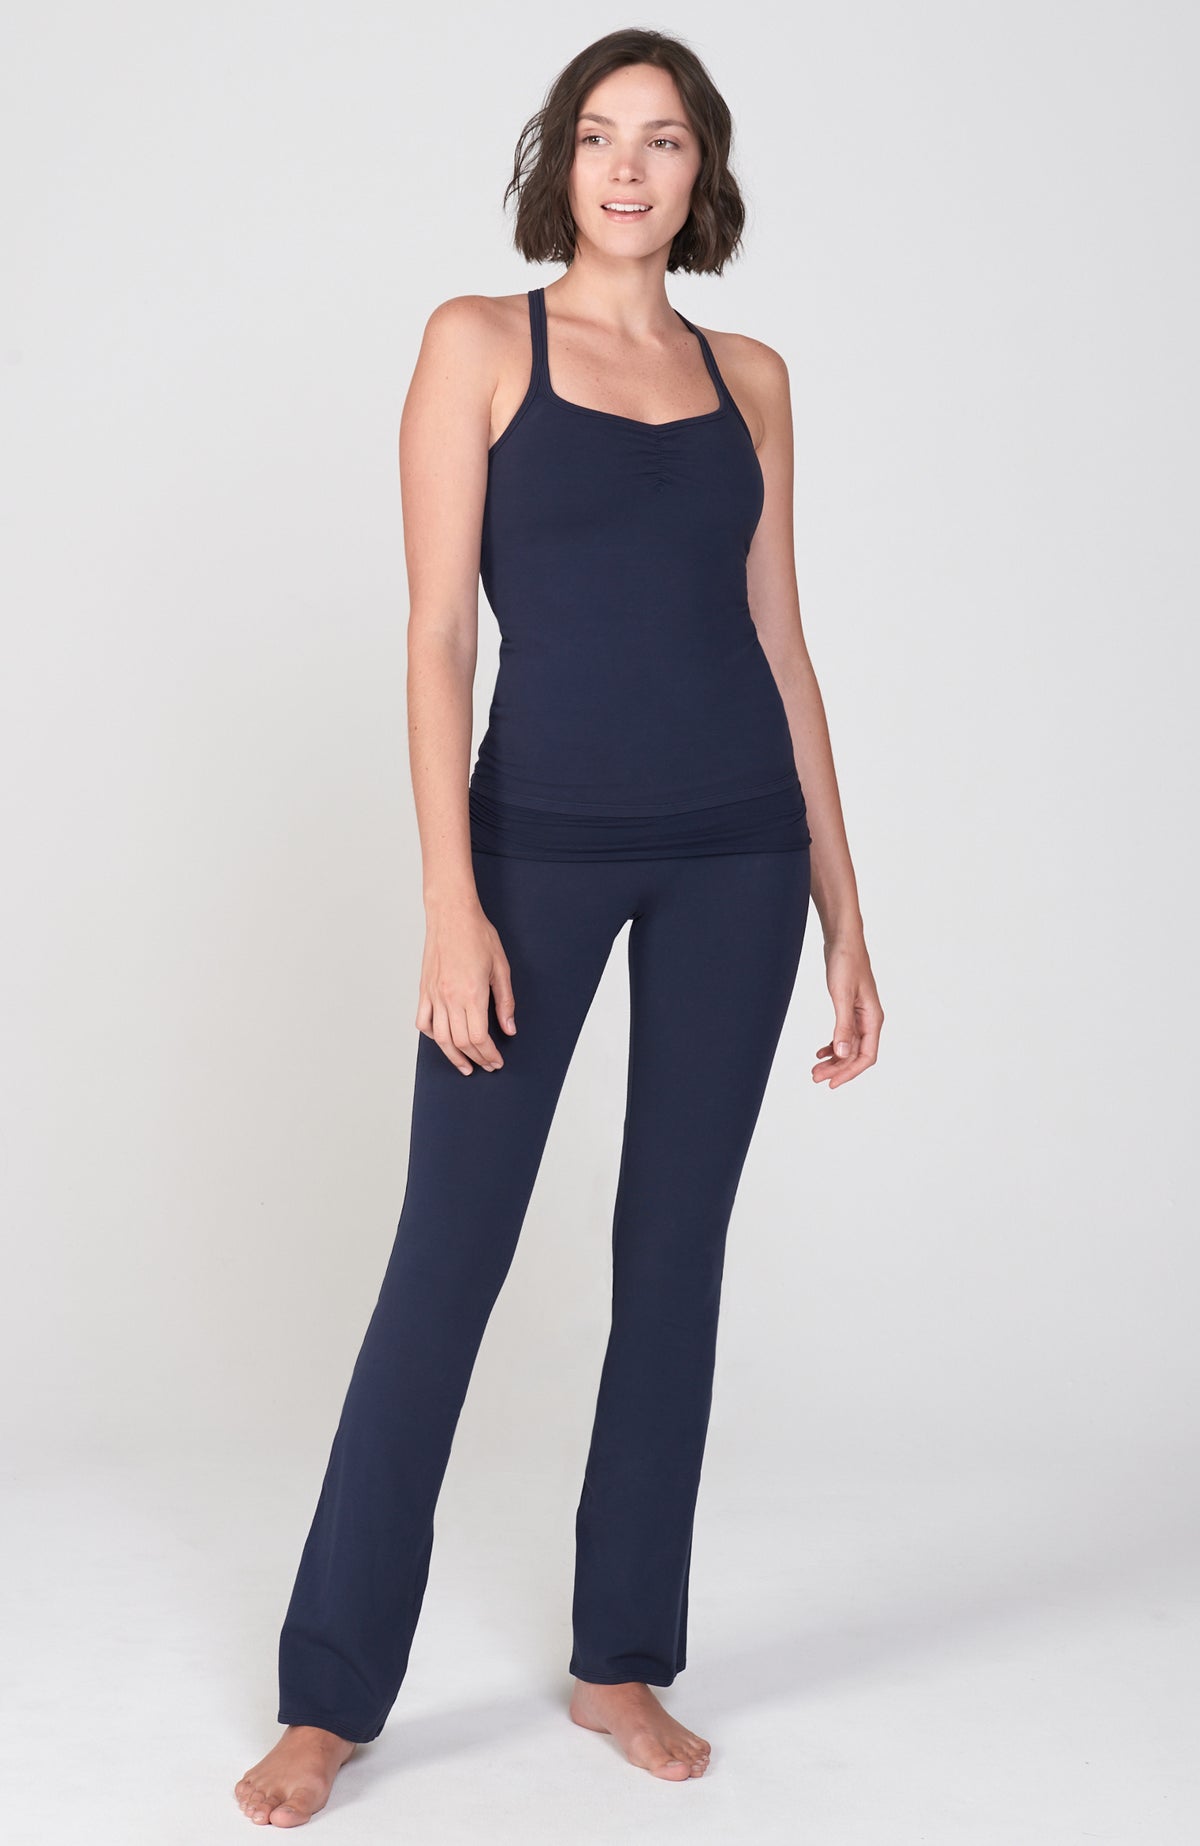 fitted Navy Blue Organic cotton lycra bootcut Activewear pant with flare leg. Shirred detail waist overlay. shown with matching Navy Racerback workout tank.